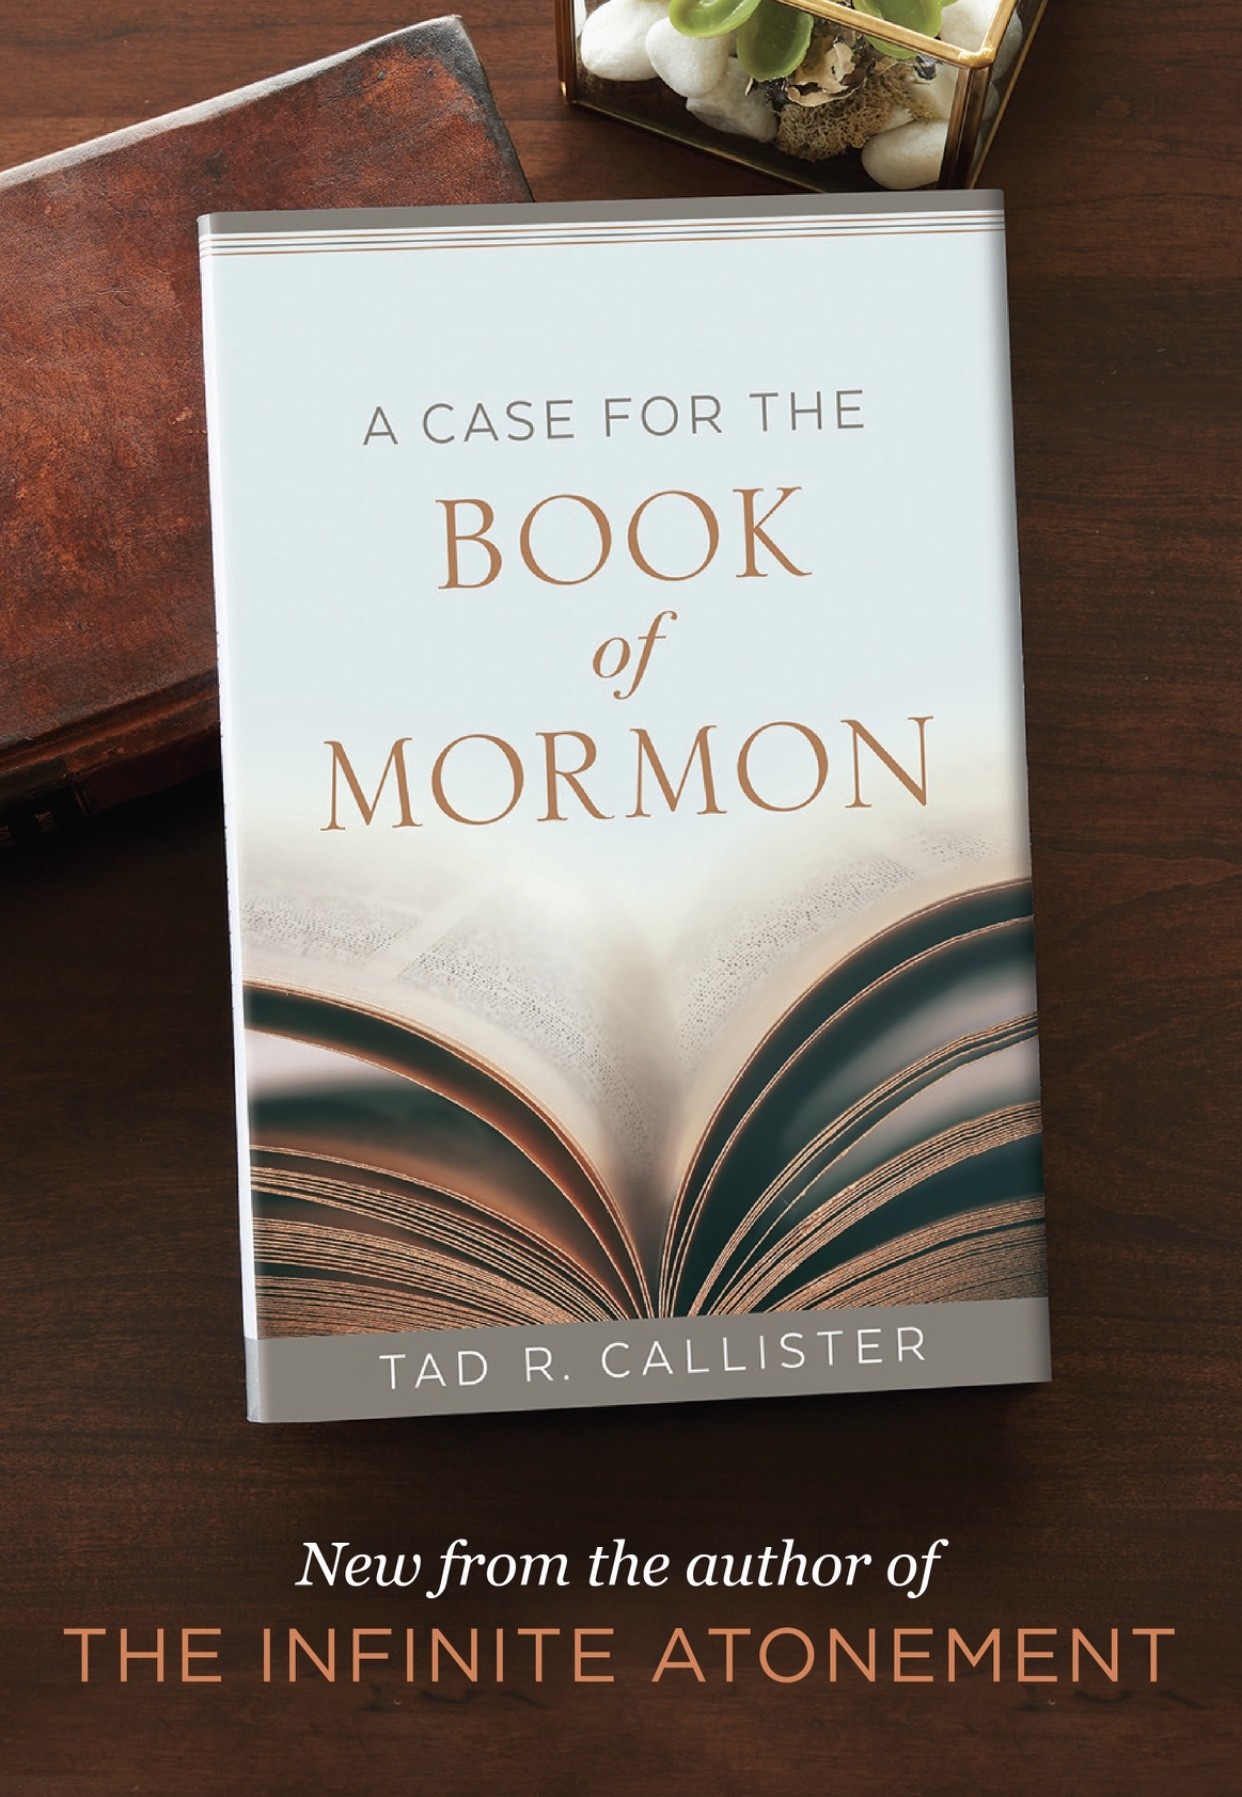 become a consecrated mission tad r callister